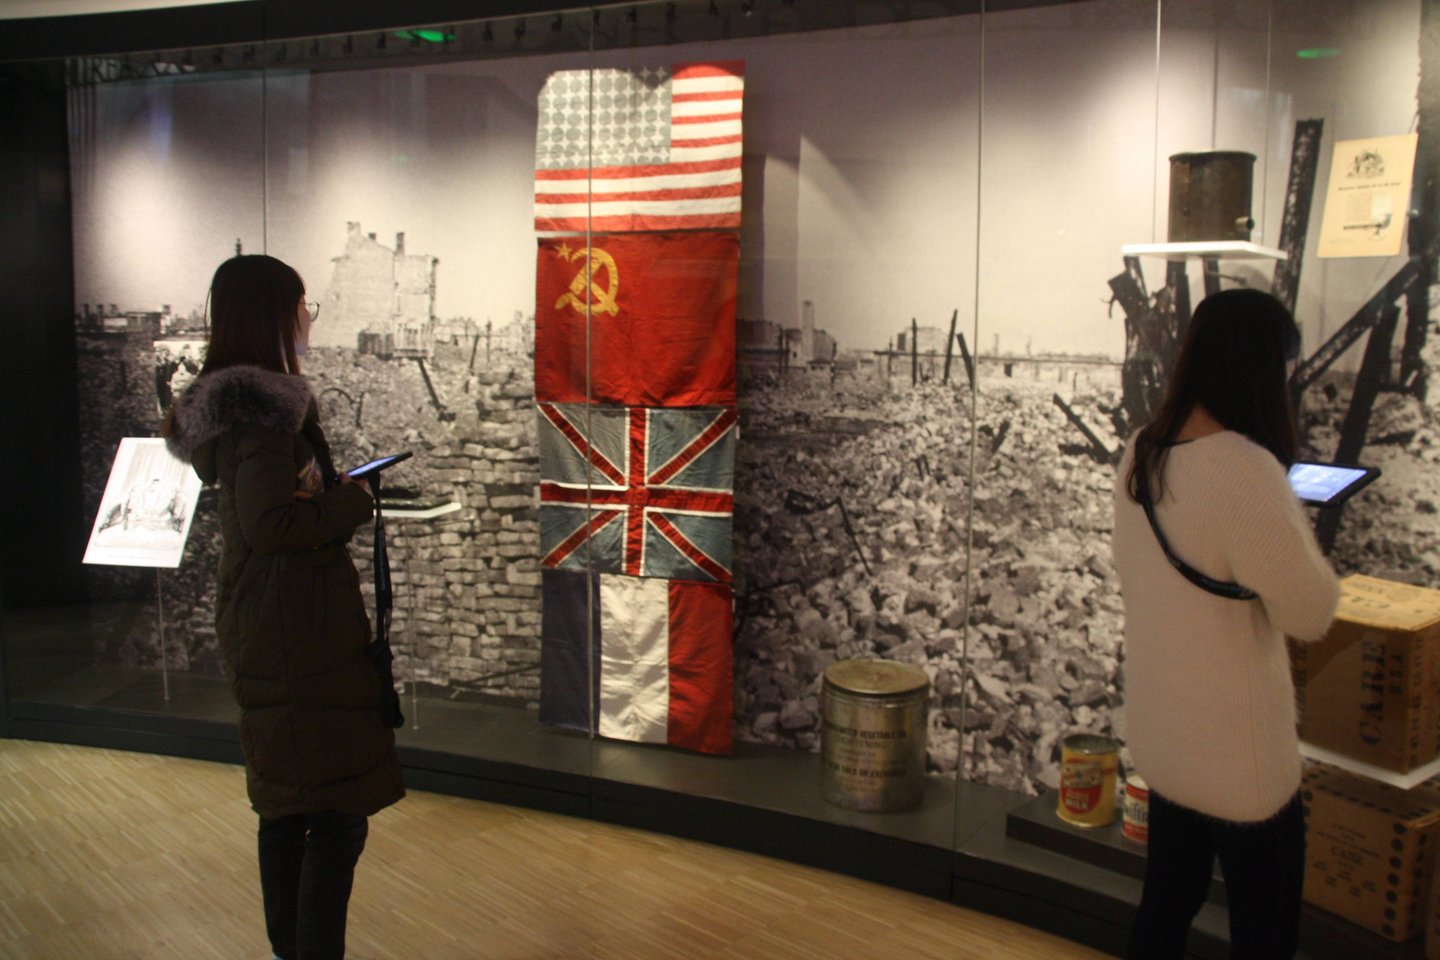 Exhibits about the second world war